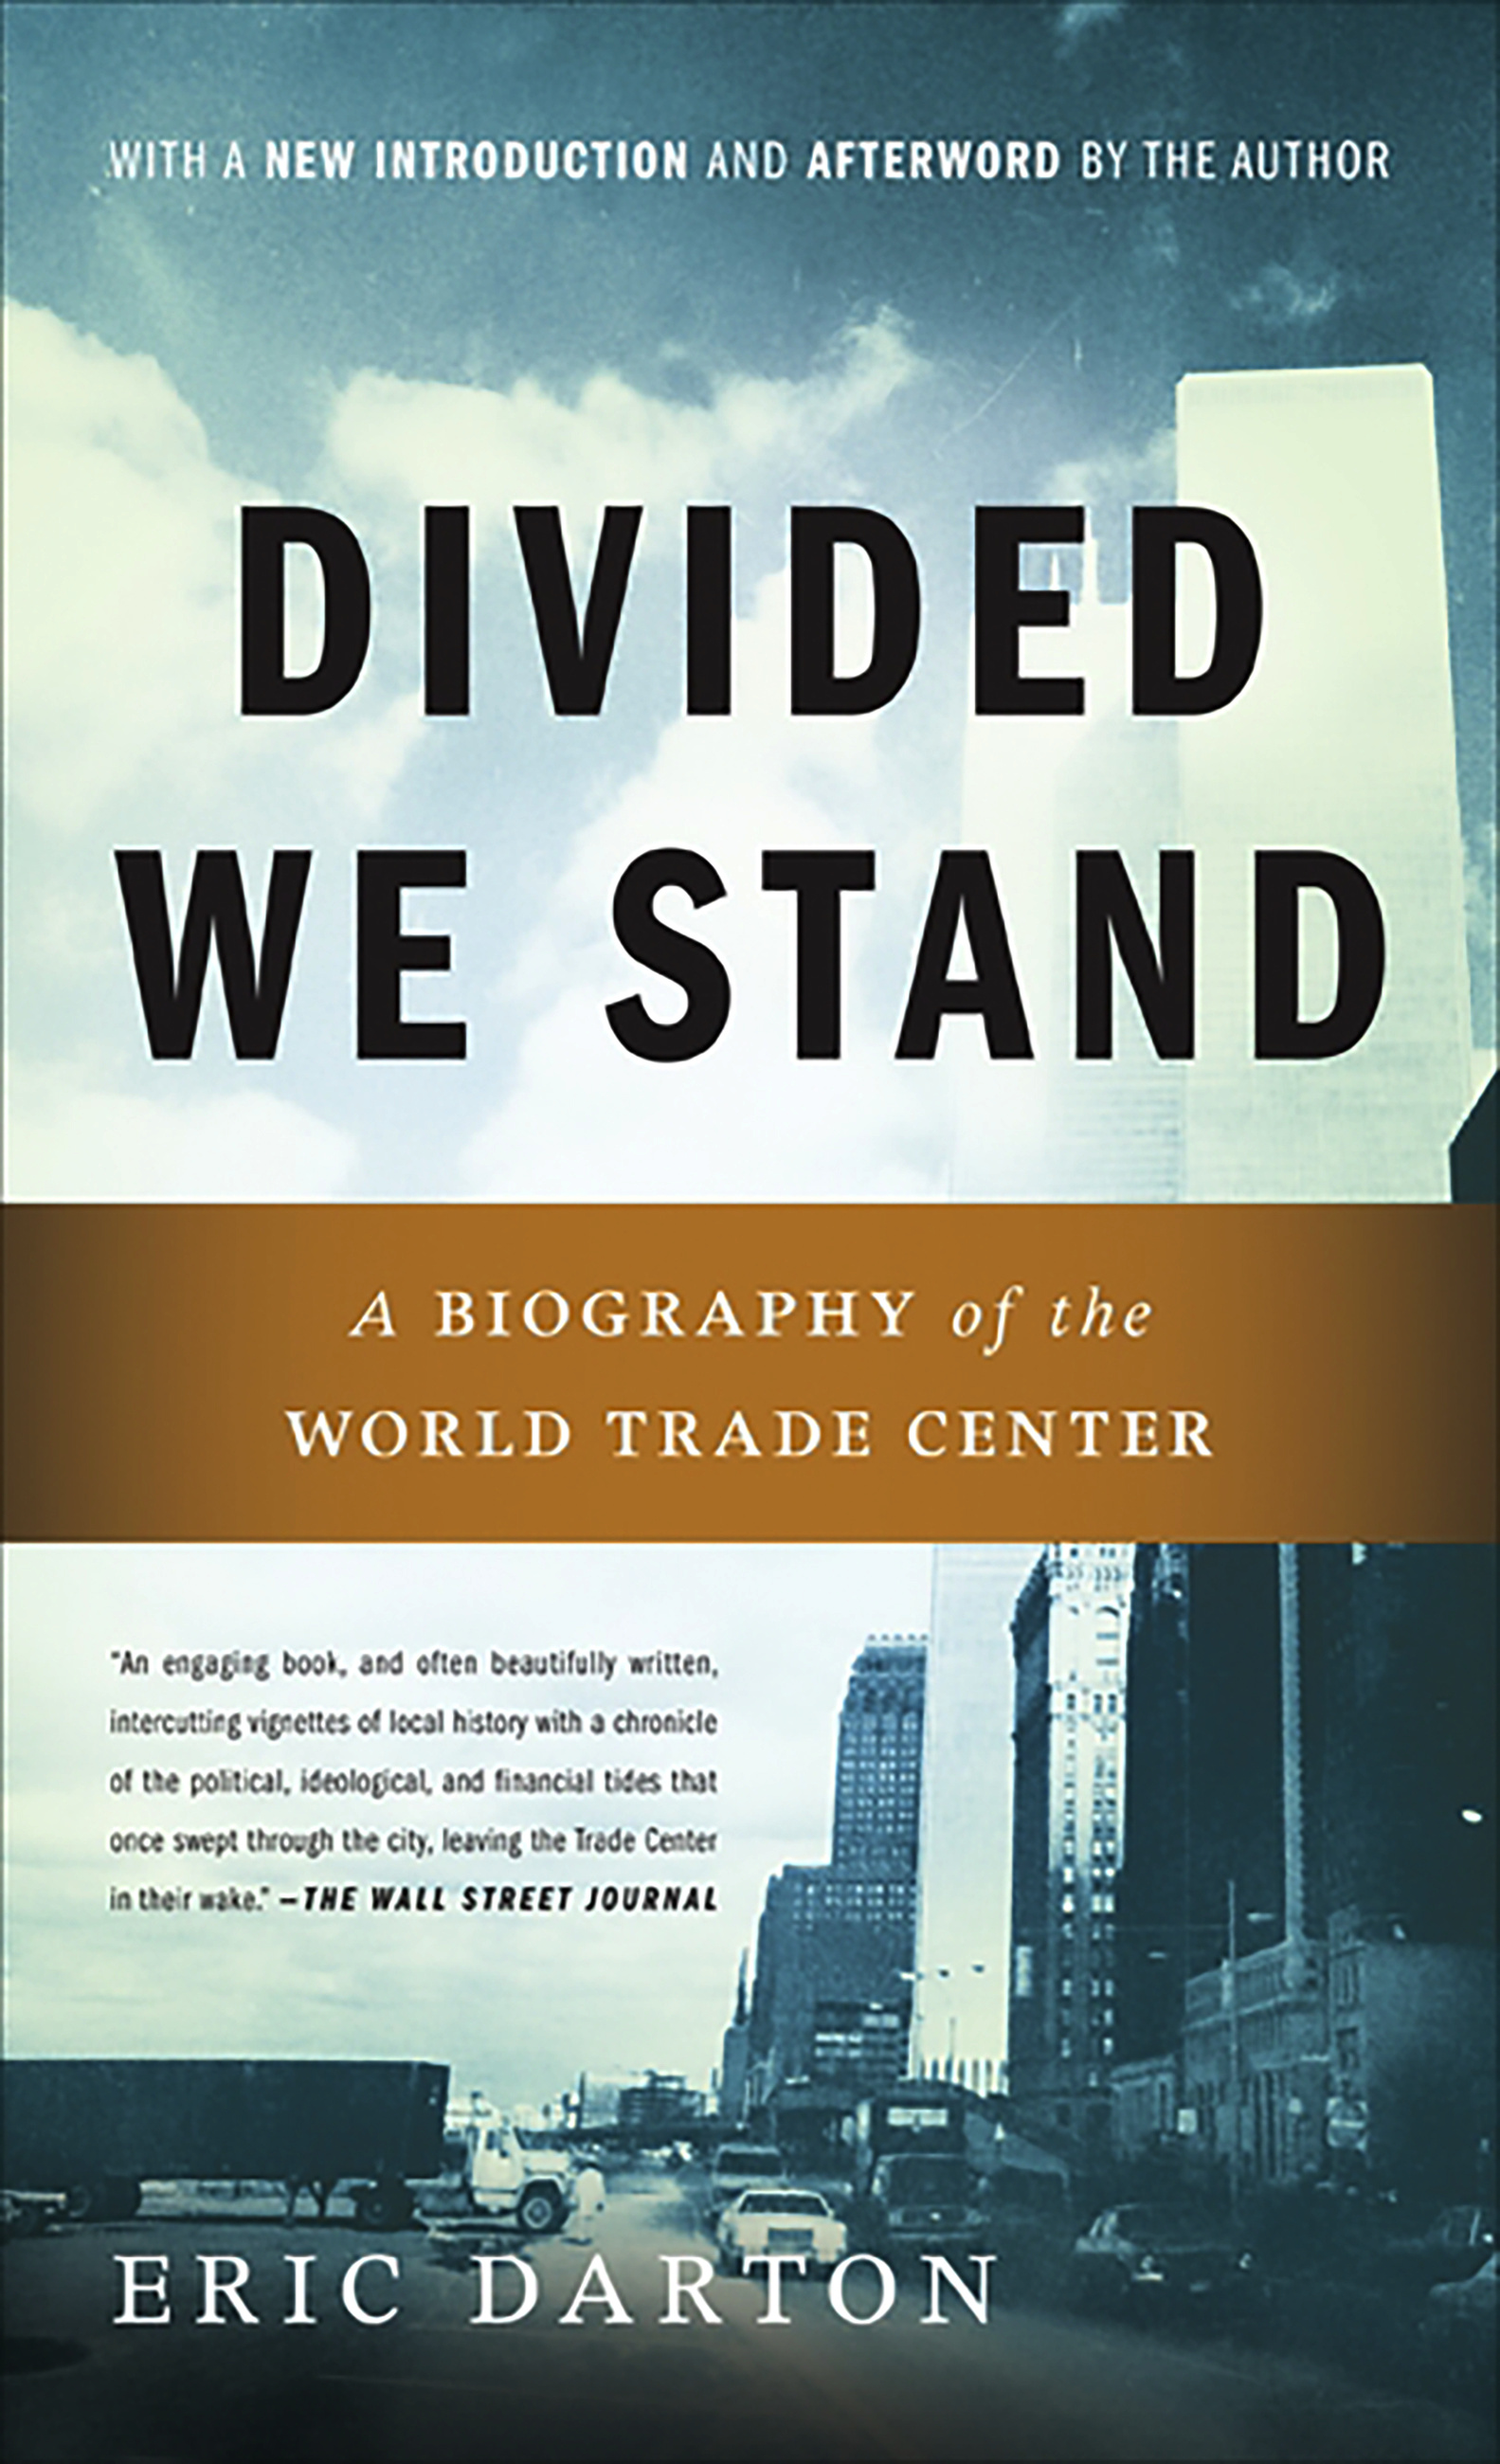 Divided We Stand by Eric Darton | Hachette Group